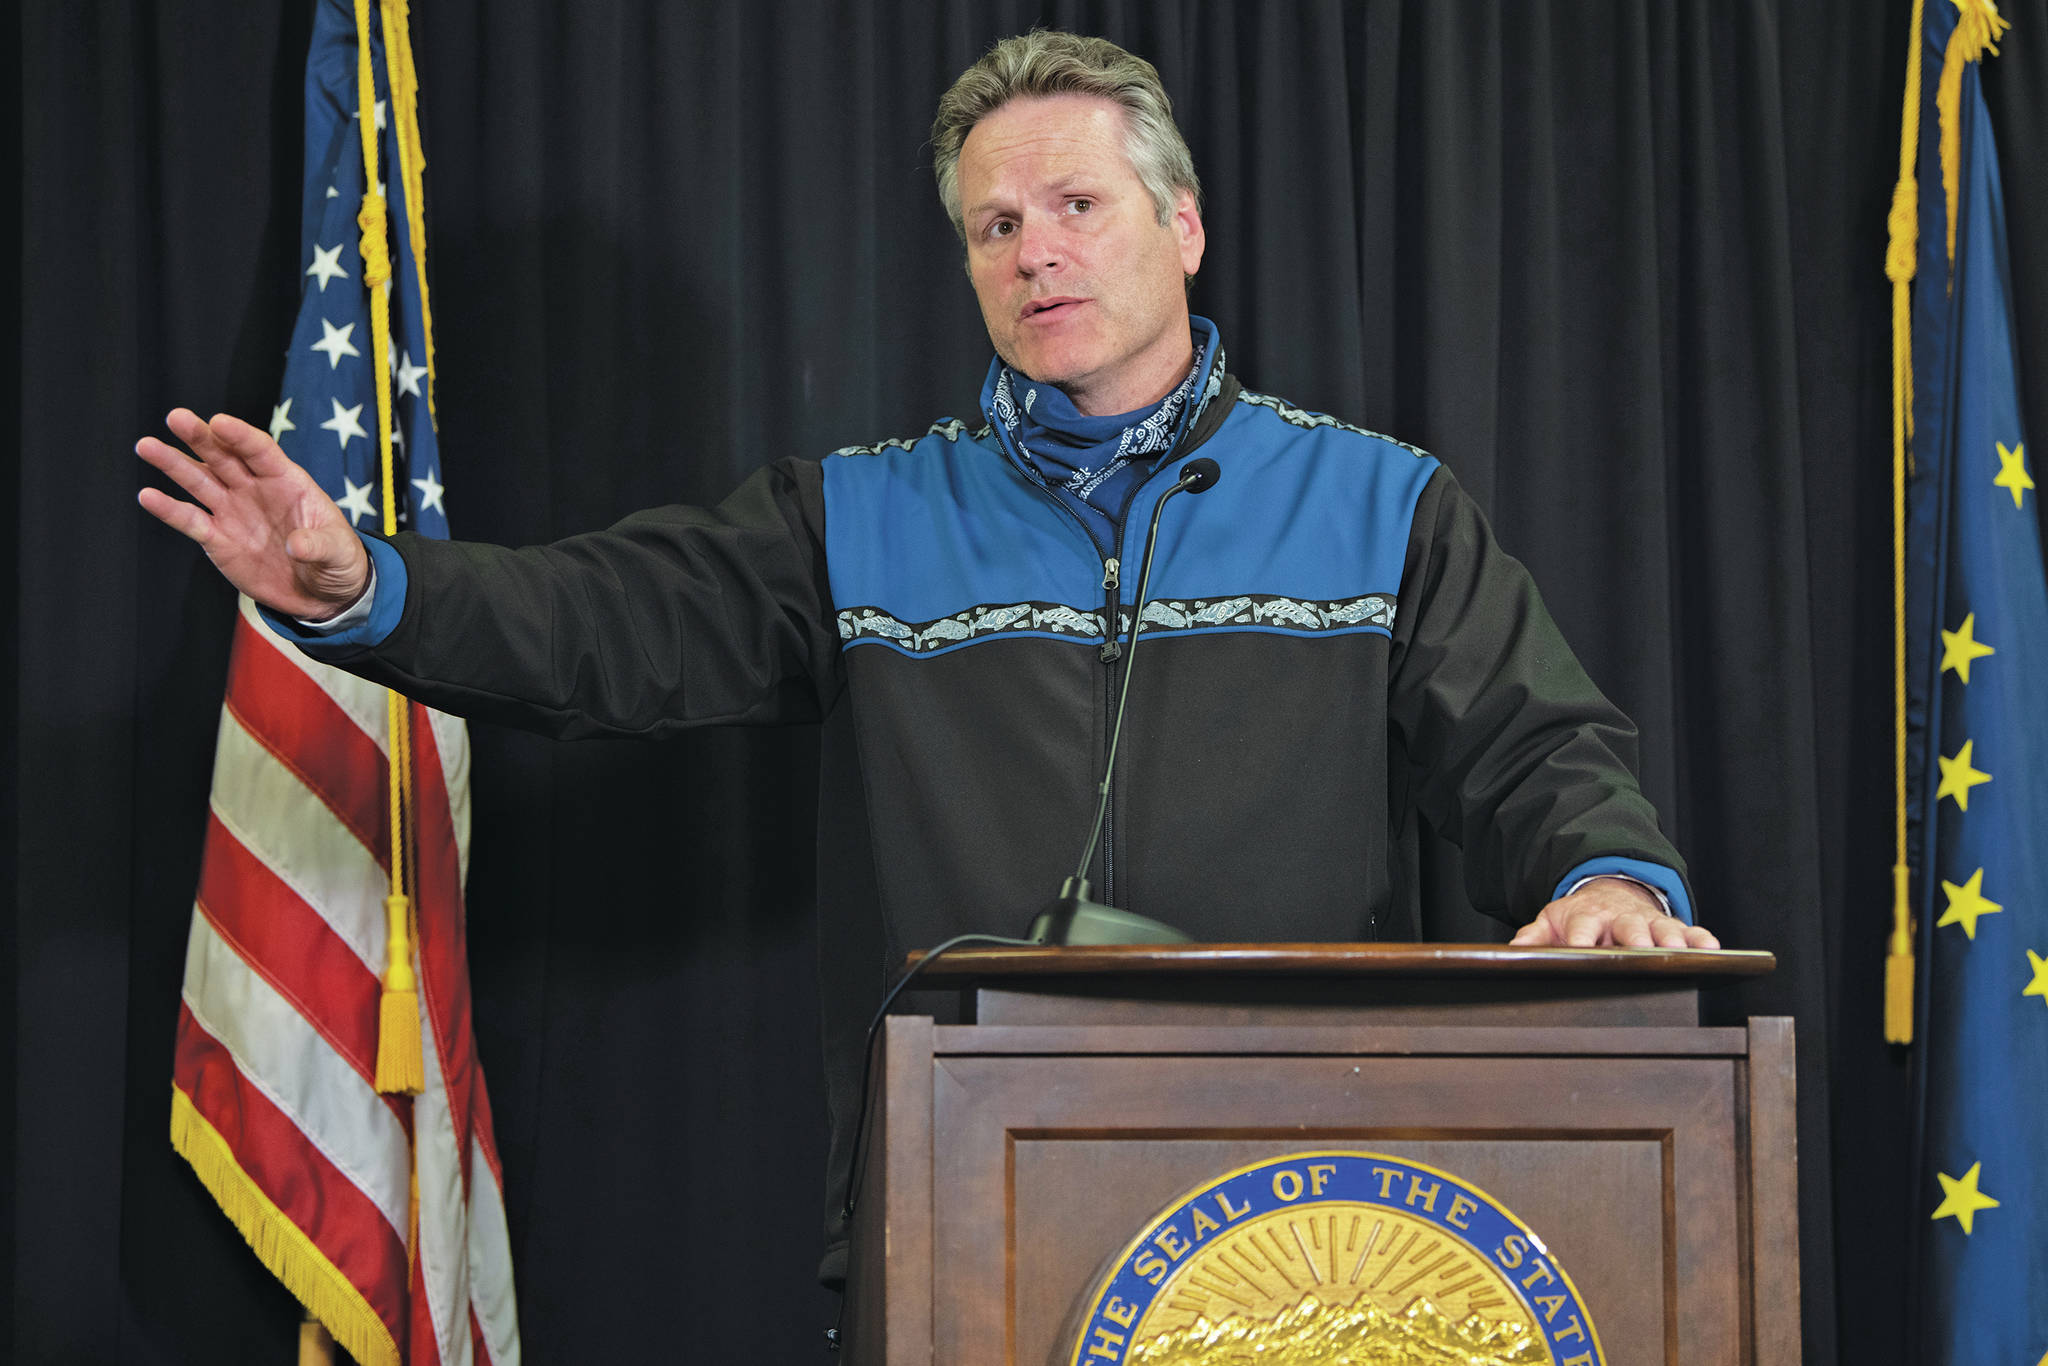 Gov. Mike Dunleavy speaks at a press conference on June 30 in Anchorage. (Photo by Austin McDaniel/Governor’s Office)